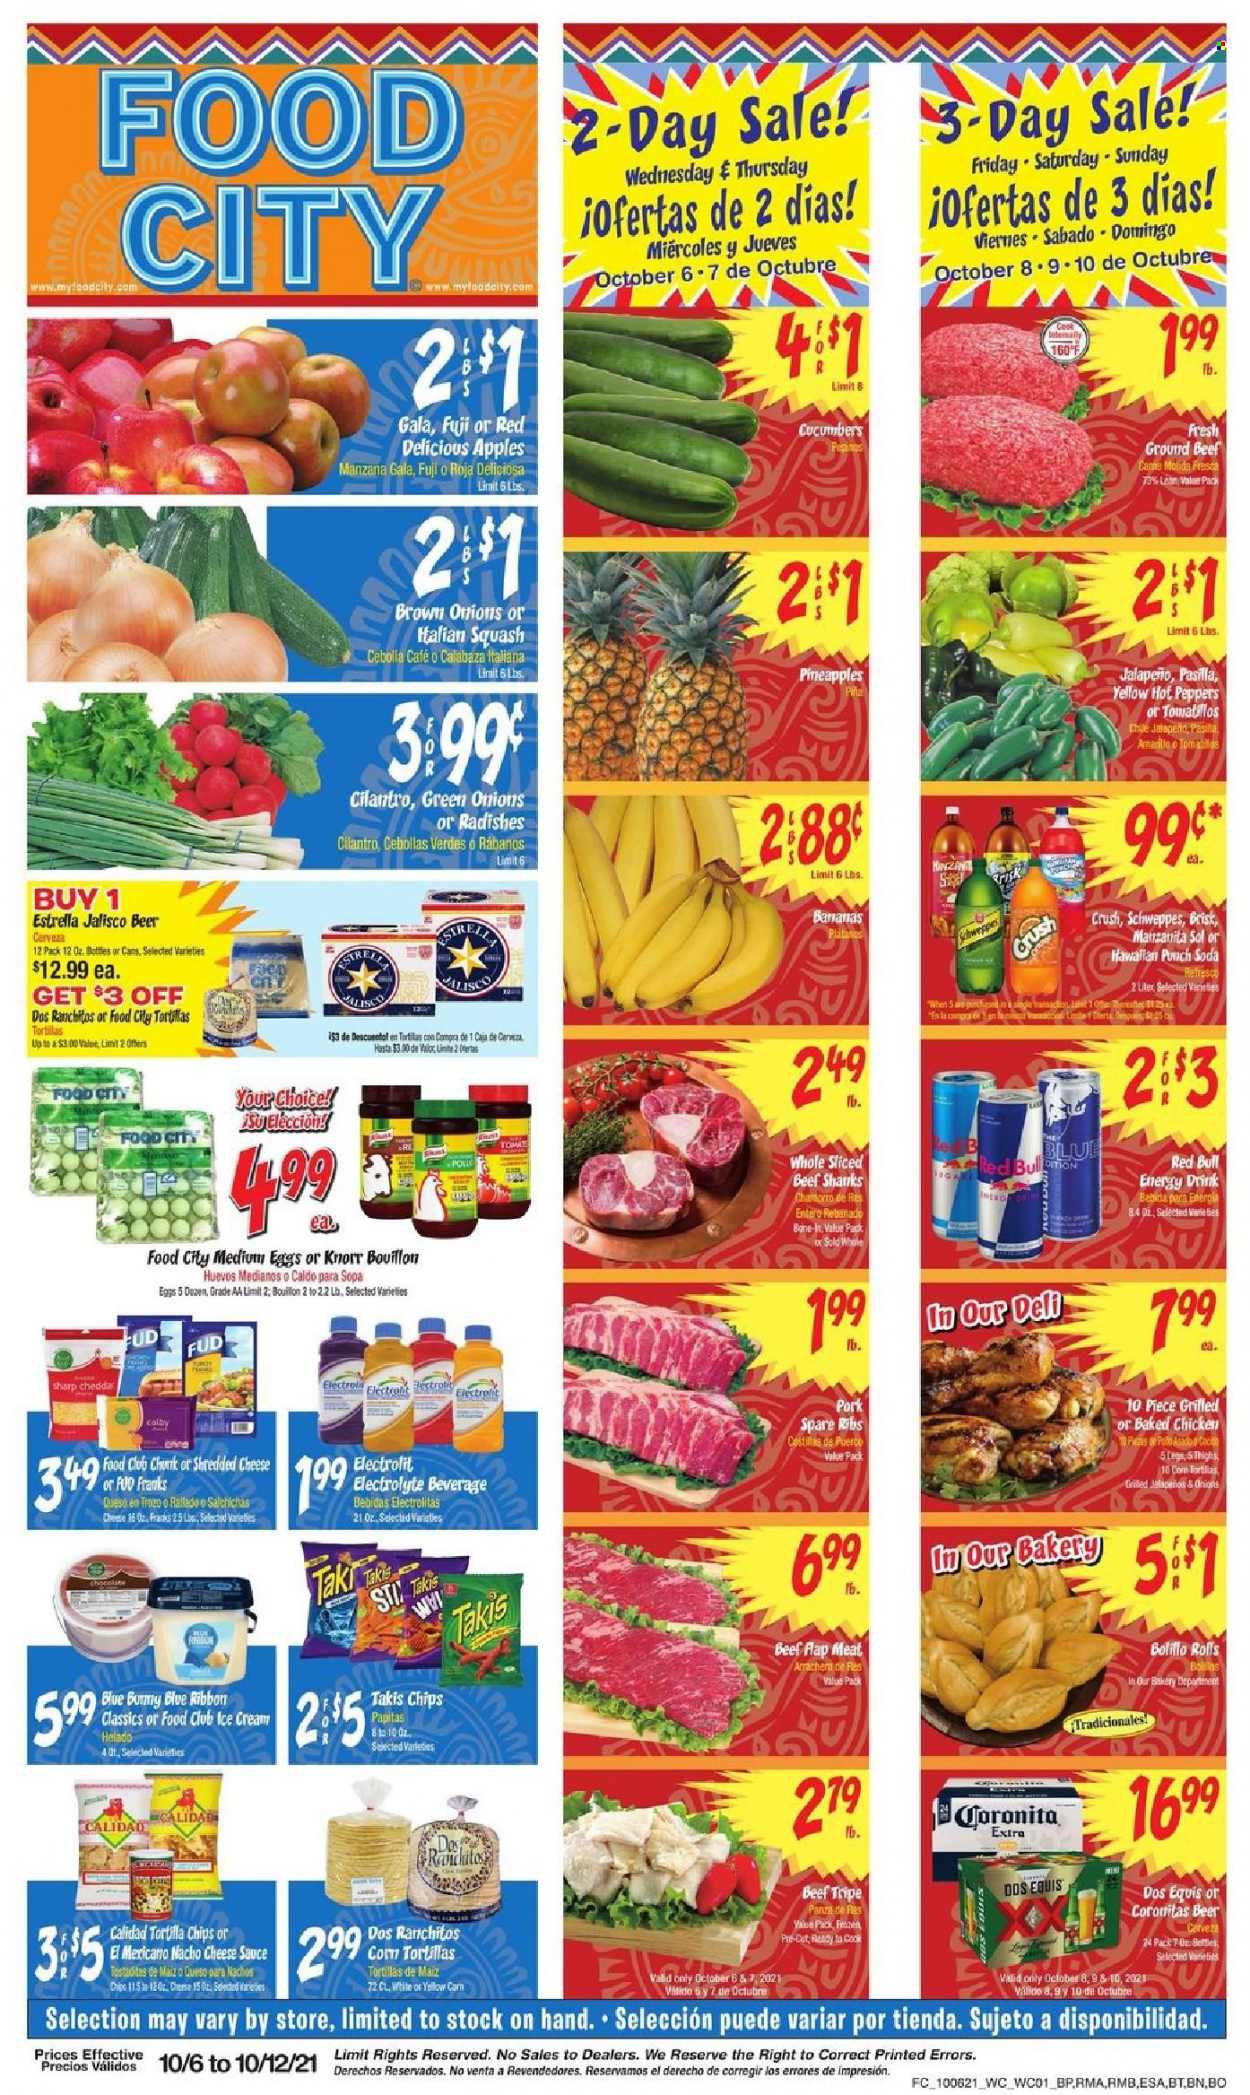 thumbnail - Food City Flyer - 10/06/2021 - 10/12/2021 - Sales products - pie, Blue Ribbon, cucumber, radishes, tomatillo, peppers, jalapeño, green onion, apples, Gala, Red Delicious apples, pineapple, Knorr, sauce, shredded cheese, eggs, ice cream, tortilla chips, chips, bouillon, cilantro, Schweppes, energy drink, Red Bull, soda, beer, Sol, beef meat, beef tripe, ground beef, pork meat, pork ribs, pork spare ribs, Dos Equis, pasilla. Page 1.